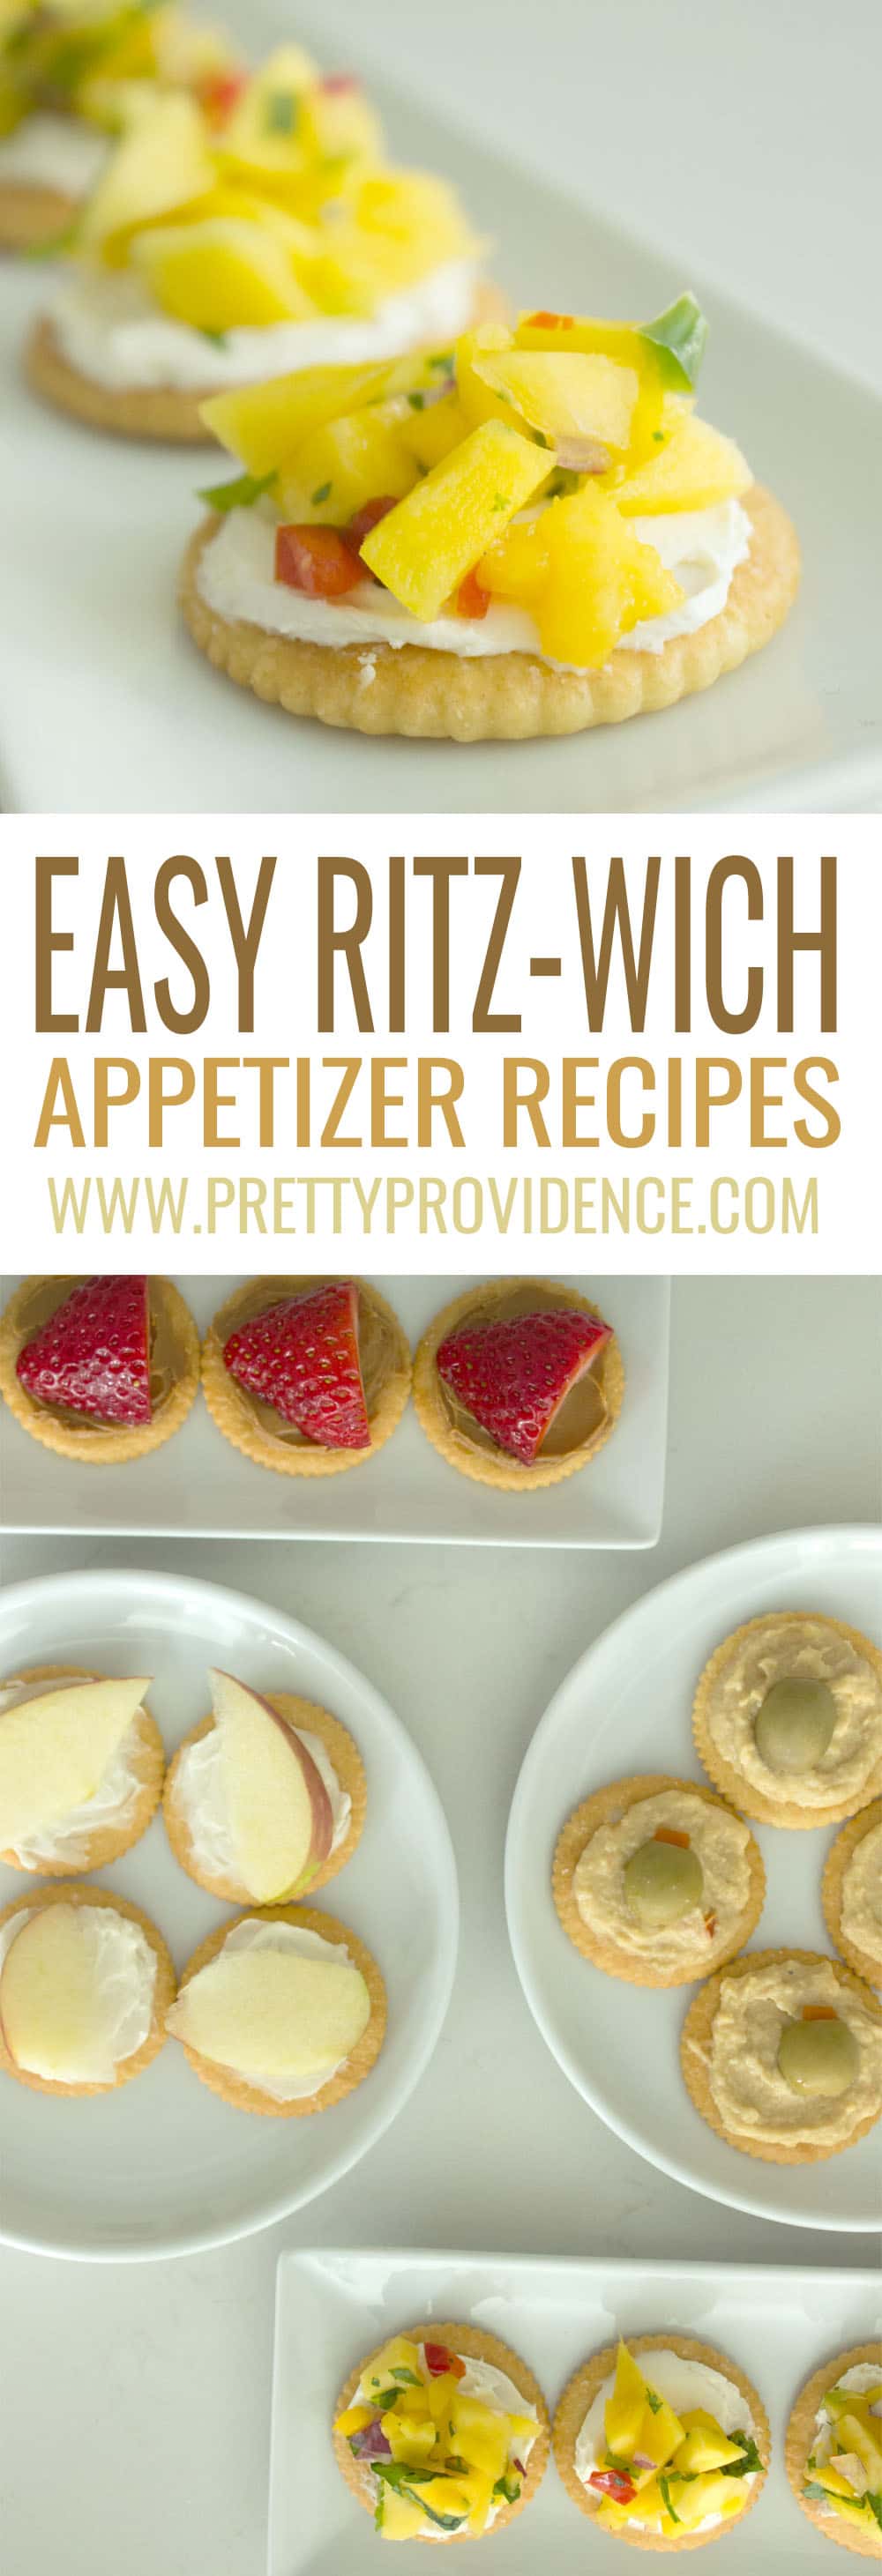 There is literally NOTHING easier or more delicious than these RITZwich recipes! Whether its for a big party or gathering or just afternoon snacking with my kids, these are always a major hit! 